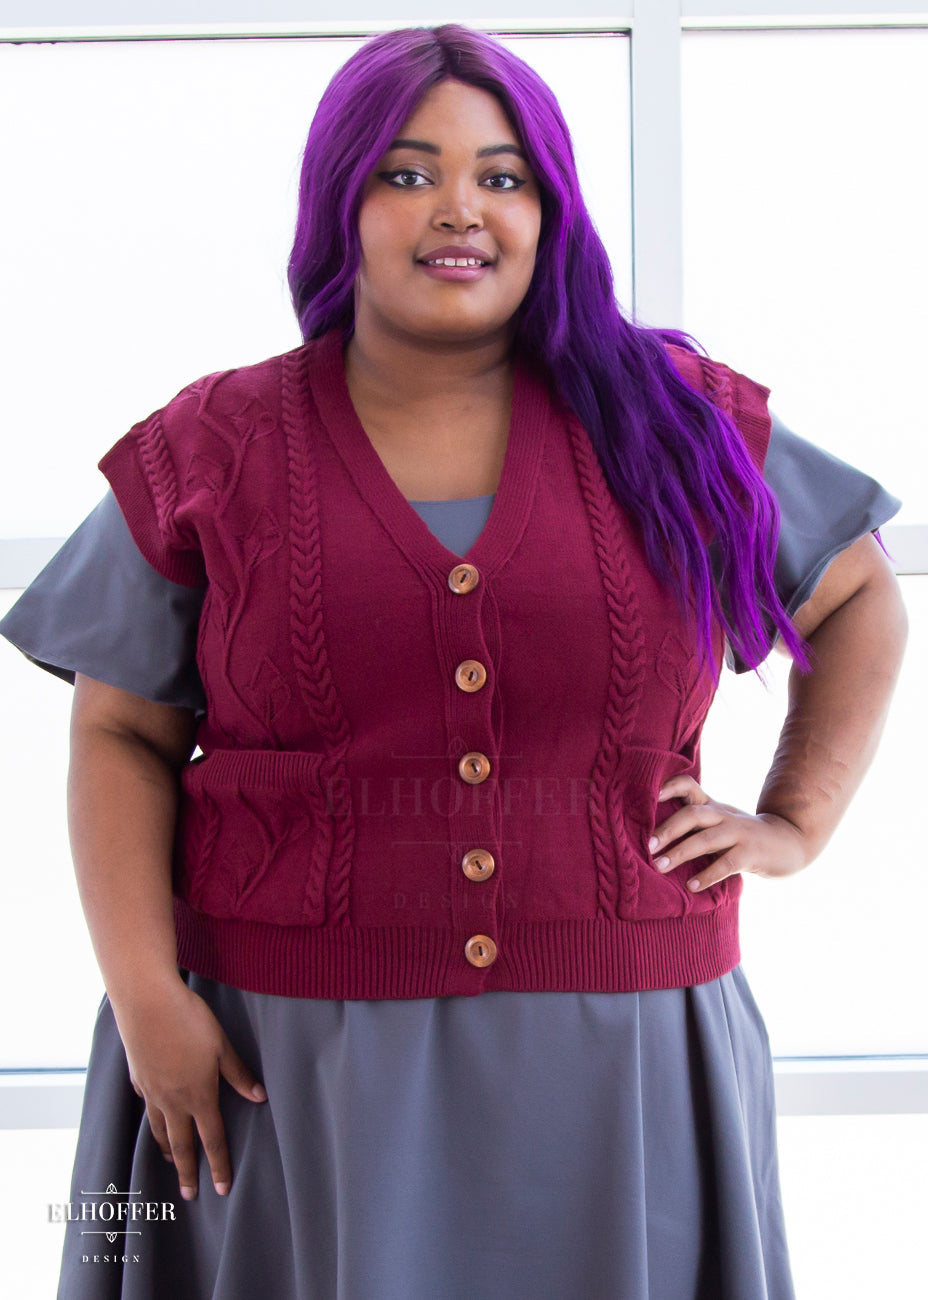 Jade, a light brown skinned 2xl model with long wavy purple hair, is wearing the L (3XL-4XL) sample of a cranberry red button up knit vest with a leafy vine and cable knit pattern, light brown buttons, and front pockets over a charcoal grey knee length dress with short flutter sleeves.